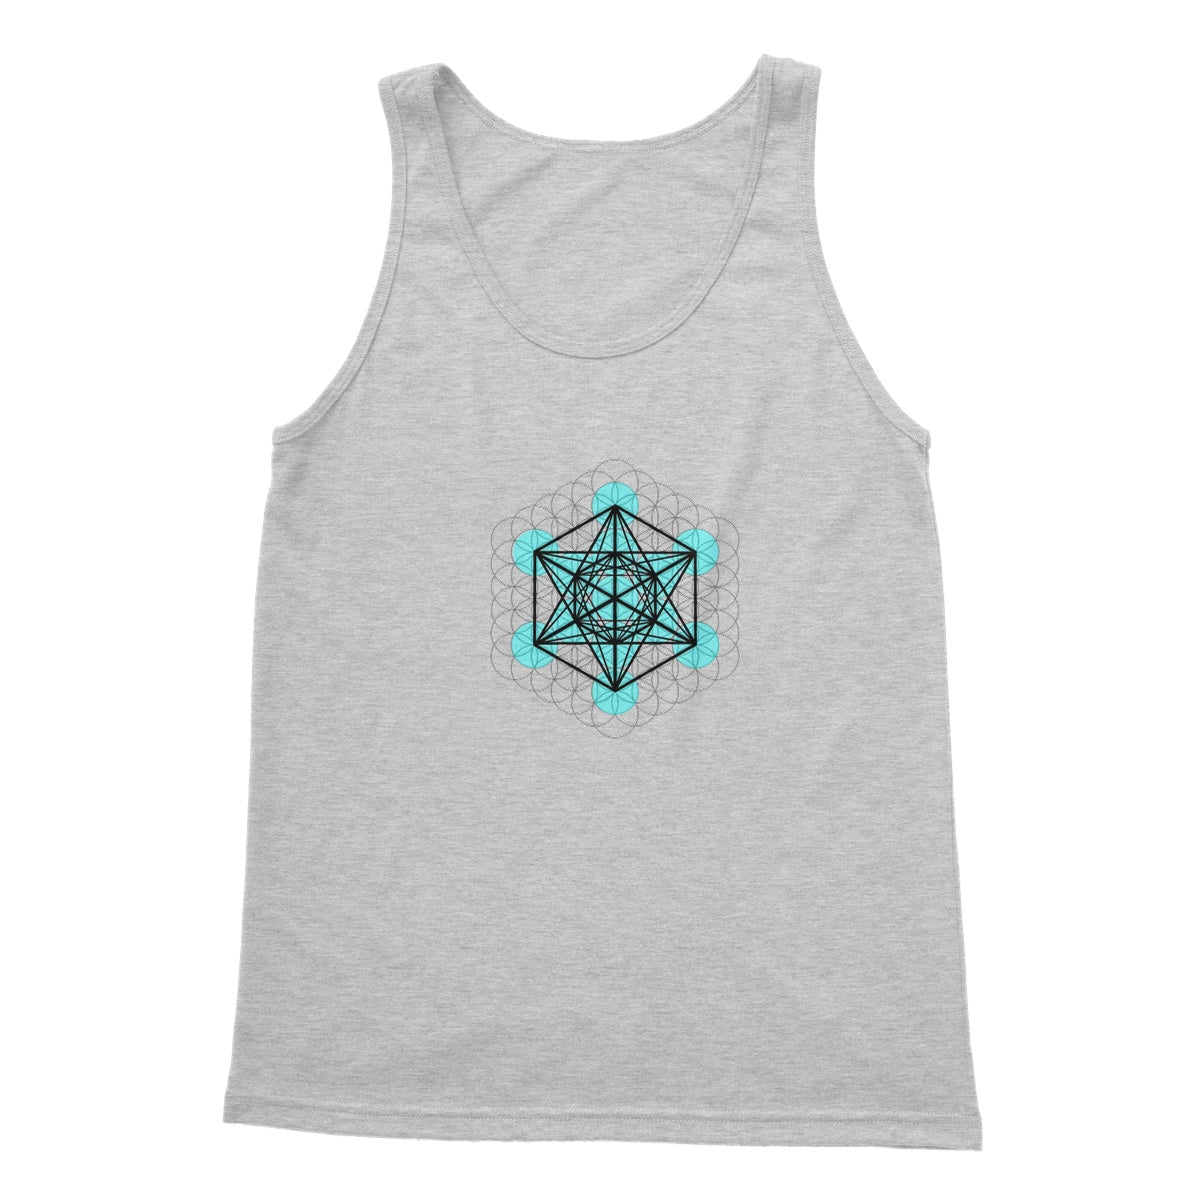 Fruit of Life, Metatron’s Cube Softstyle Tank Top - Nature of Flowers